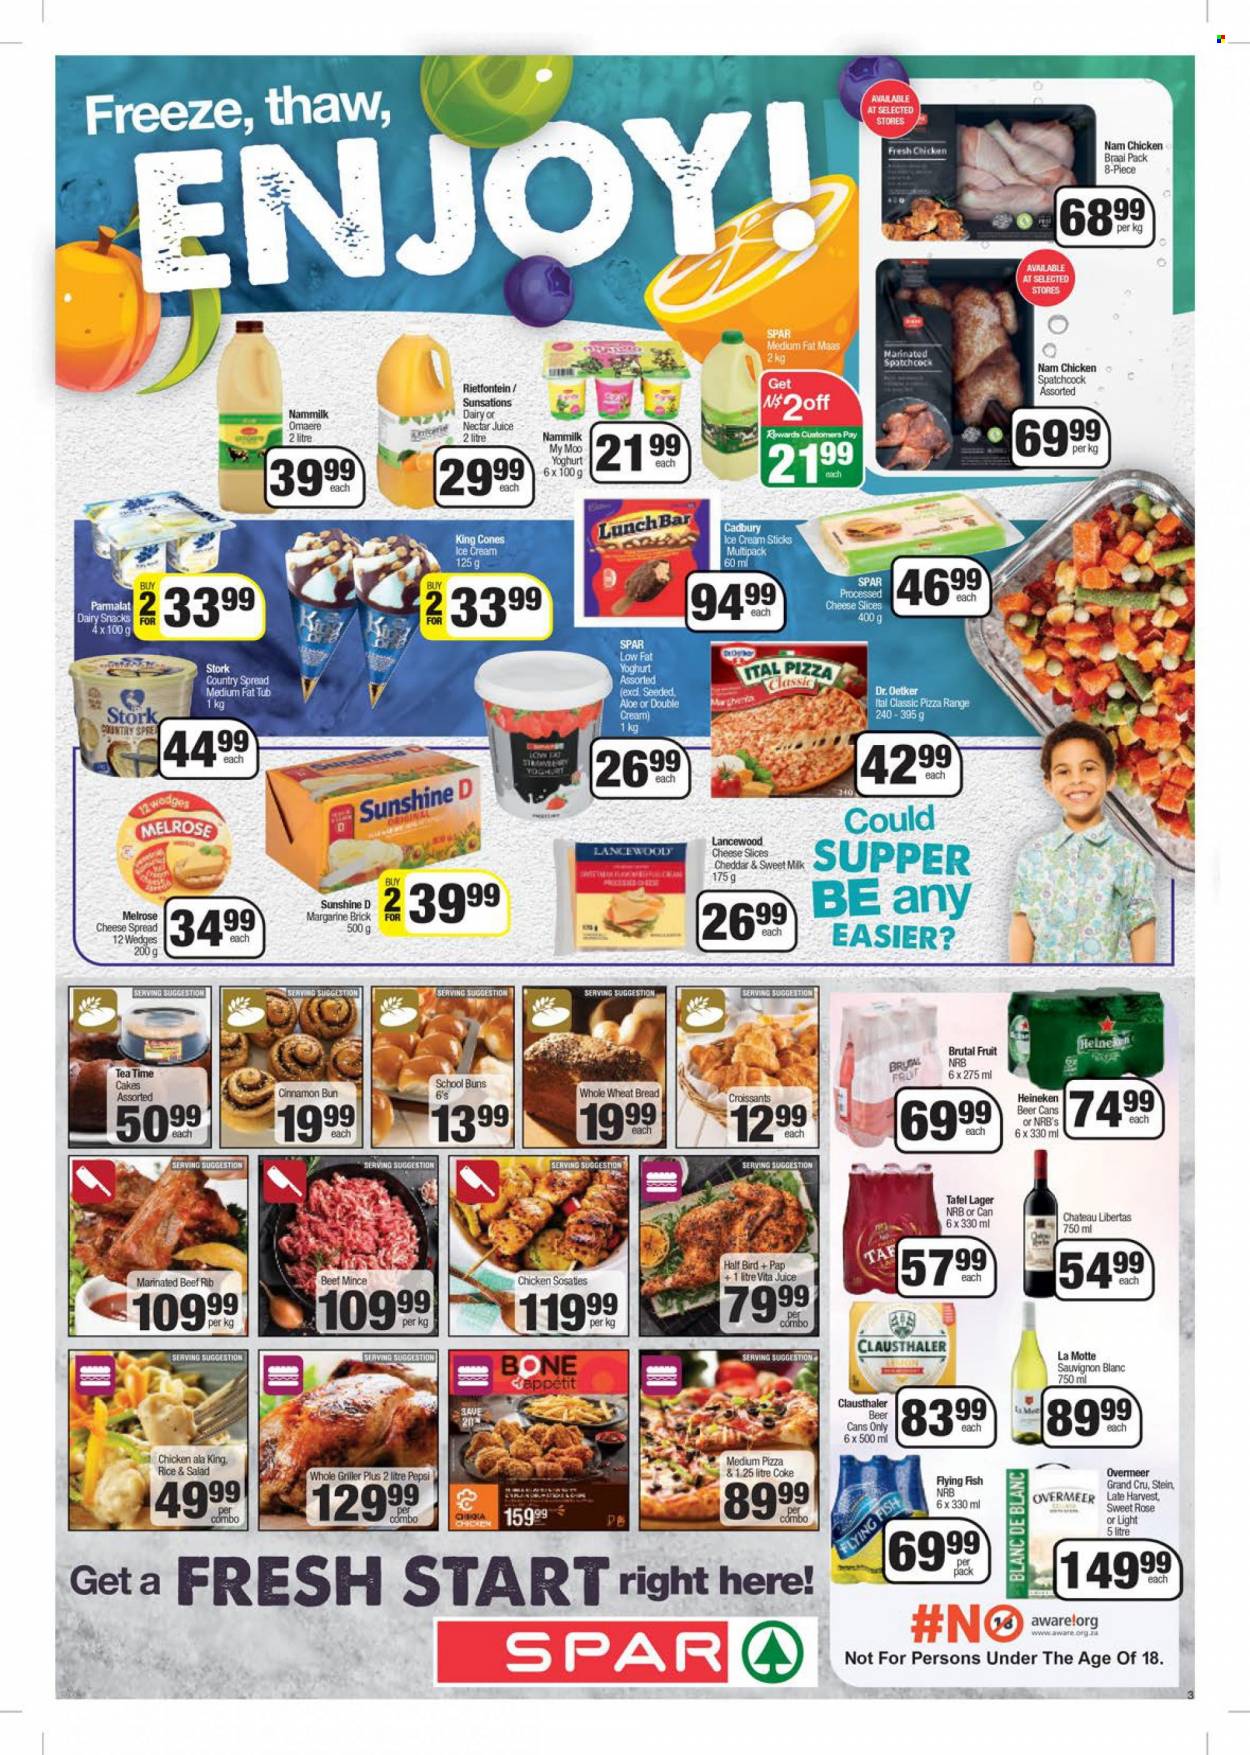 SPAR catalogue  - 24/01/2023 - 06/02/2023 - Sales products - wheat bread, croissant, buns, fish, pizza, cheese spread, sliced cheese, cheddar, Dr. Oetker, Lancewood, Melrose, yoghurt, Parmalat, milk, amasi, margarine, Sunshine, ice cream, Ital Pizza, snack, Cadbury, rice, Coca-Cola, Pepsi, juice, tea, white wine, Sauvignon Blanc, rosé wine, beer, Heineken, Lager, spatchcock chicken, beef meat, ground beef, marinated beef. Page 3.